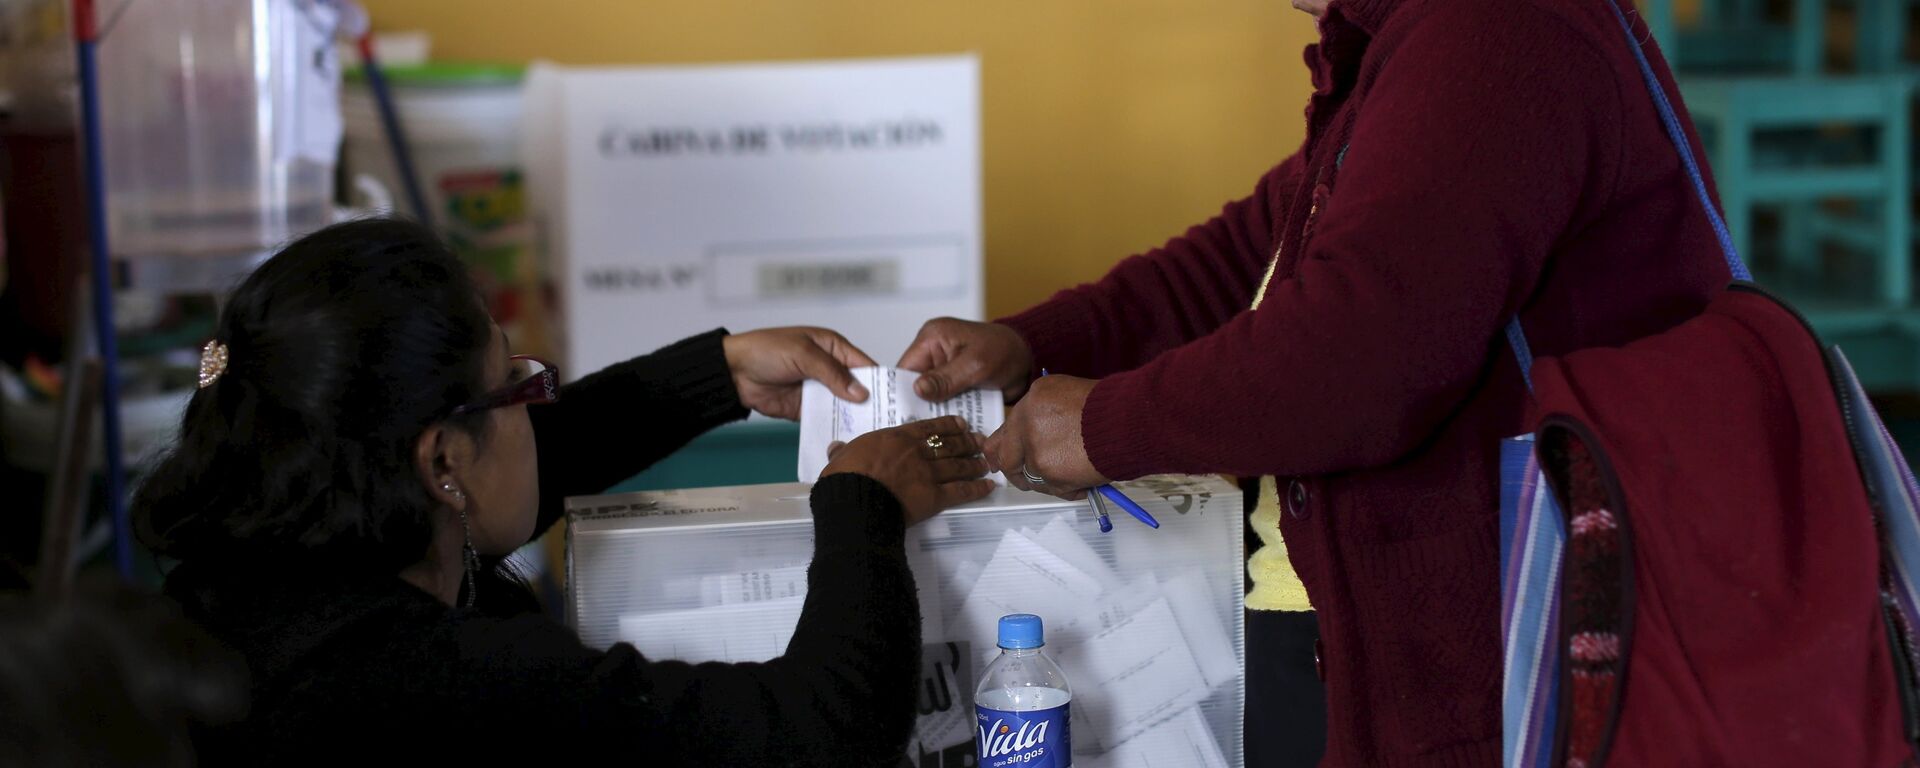 A woman votes during presidential election at a polling station at a classroom in Cuzco, Peru, April 10, 2016. REUTERS/Janine Costa - Sputnik Mundo, 1920, 26.05.2021